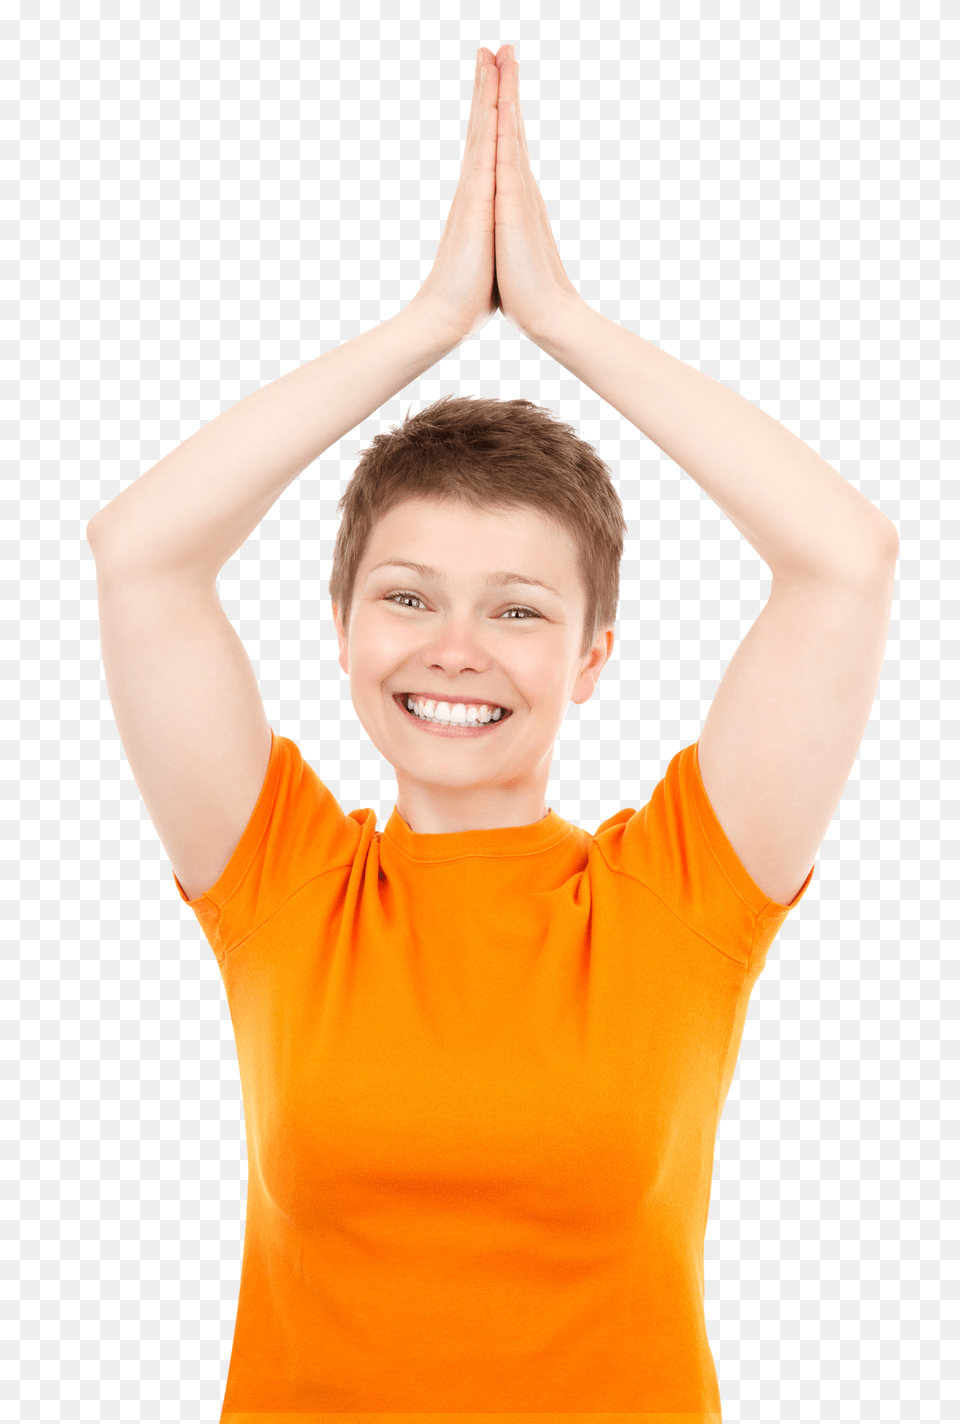 Pngpix Com Happy Woman Joining Her Palms Together, T-shirt, Smile, Portrait, Photography Png